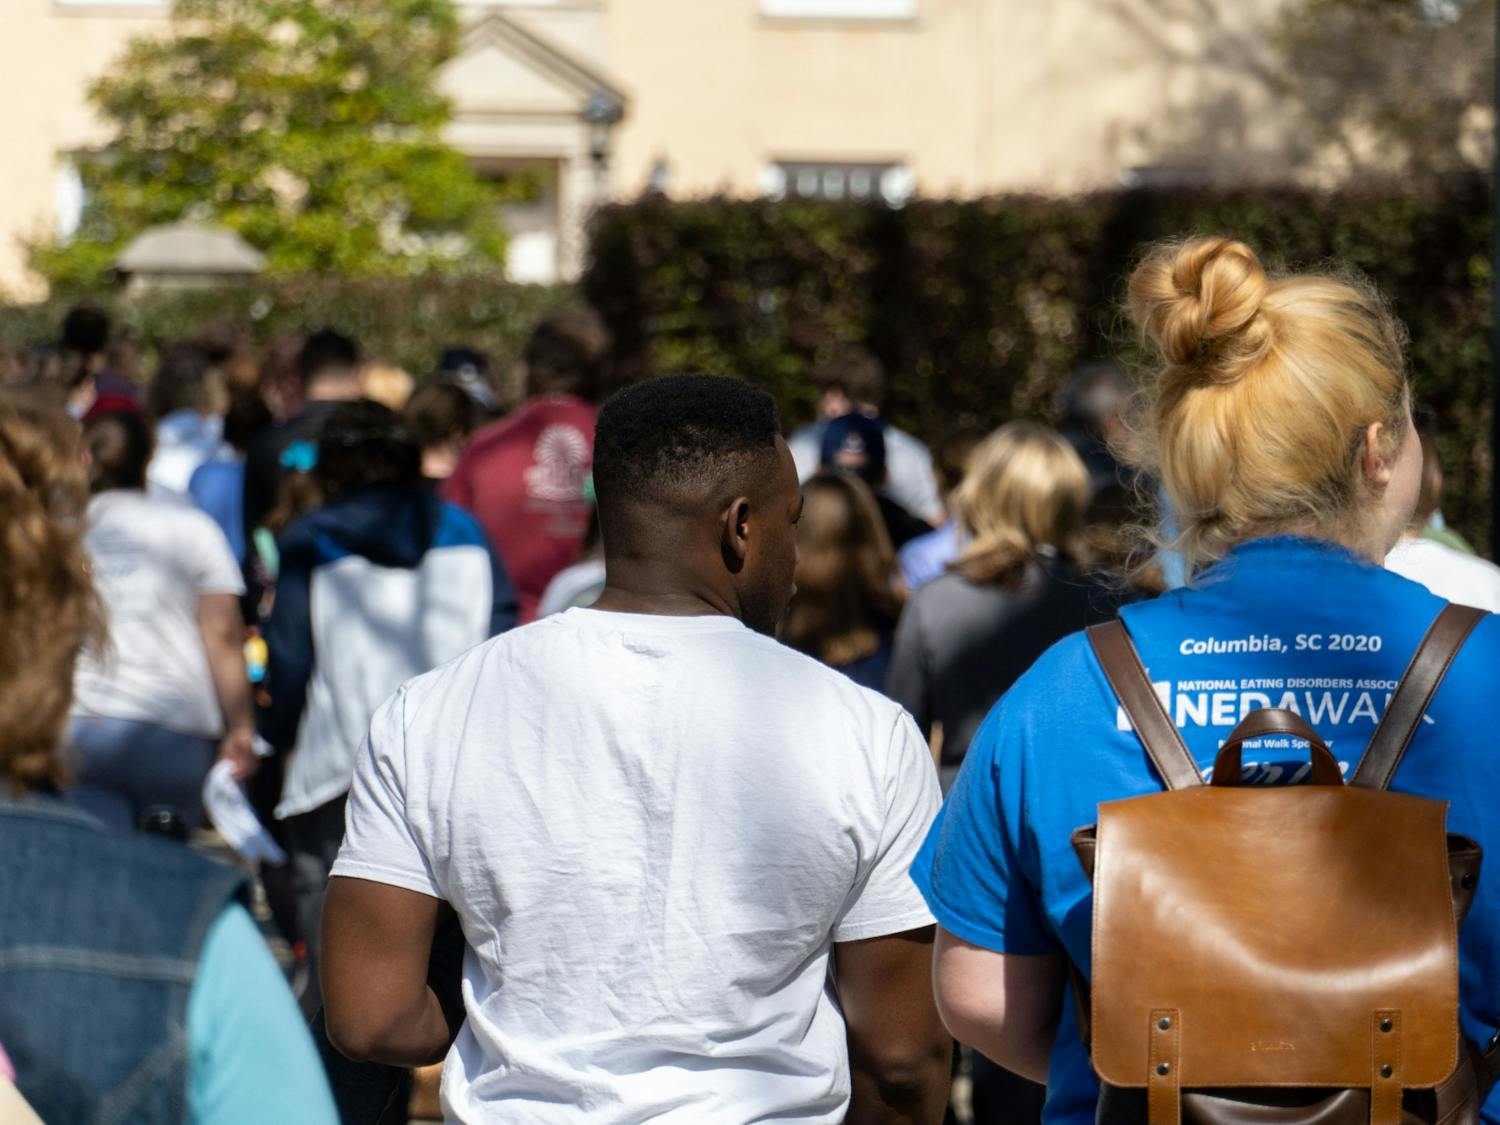 Community members and supporters of NEDA walk across the Carolina campus on Feb. 26, 2022.The NEDA Walk took place as a charity event raise support and money for those who effected by eating disorders.